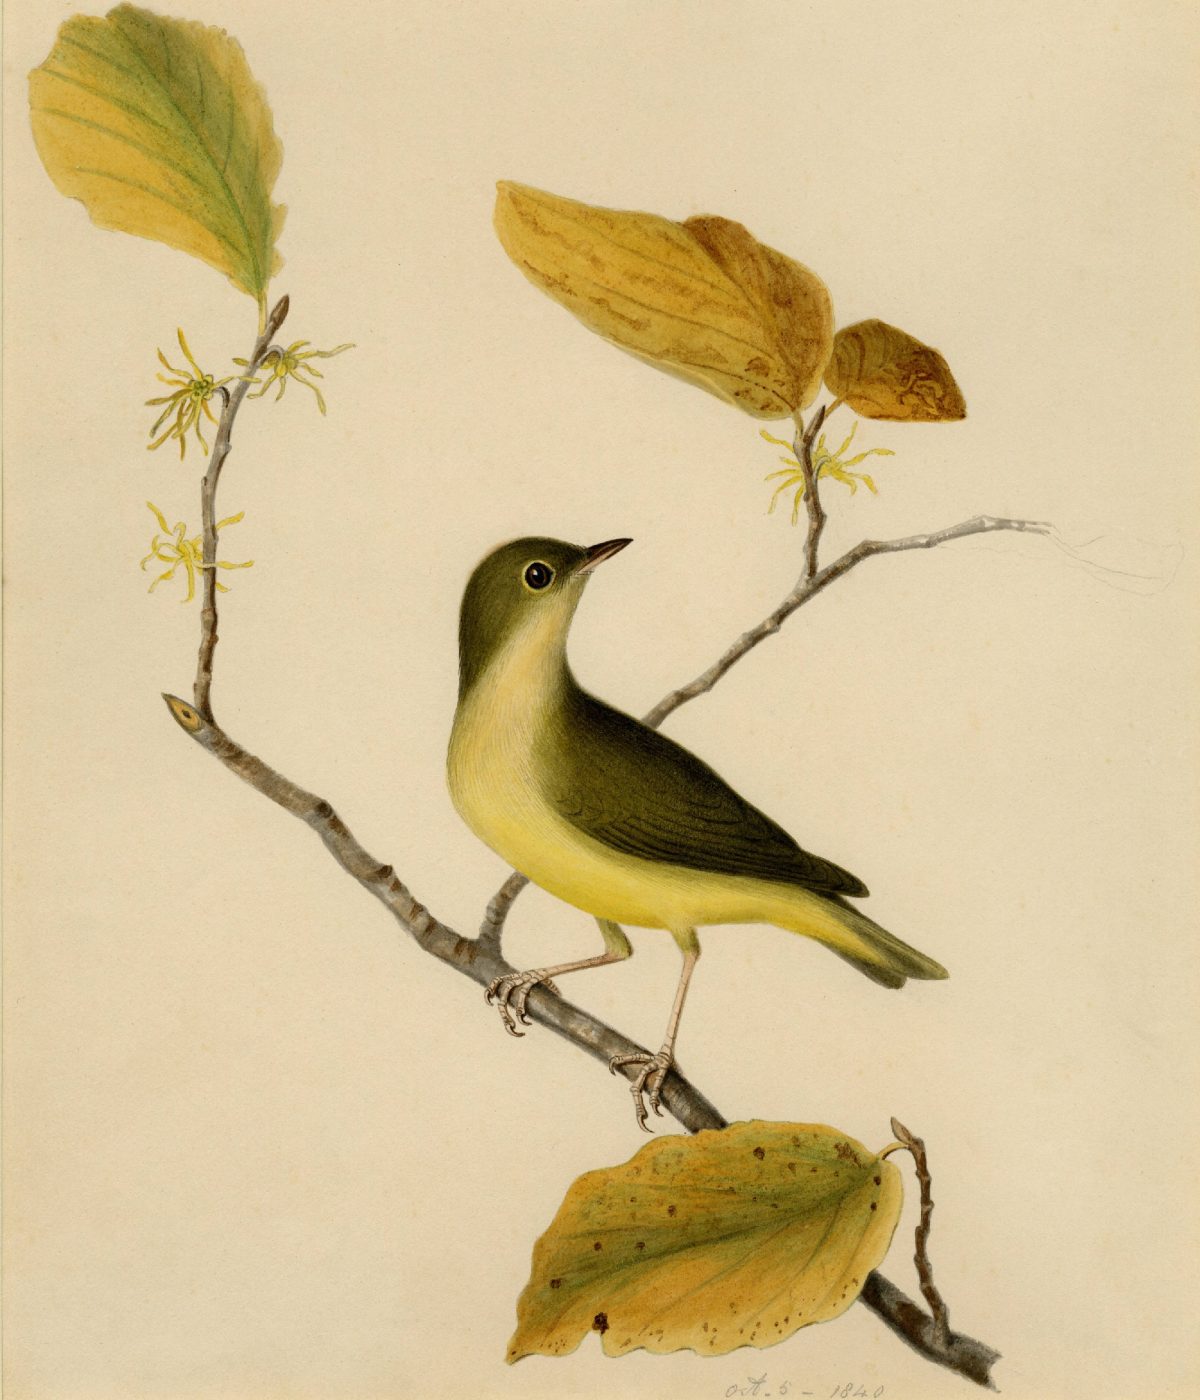 Connecticut Warbler "The single bird is depicted perched on a flowering branch of witch hazel" 